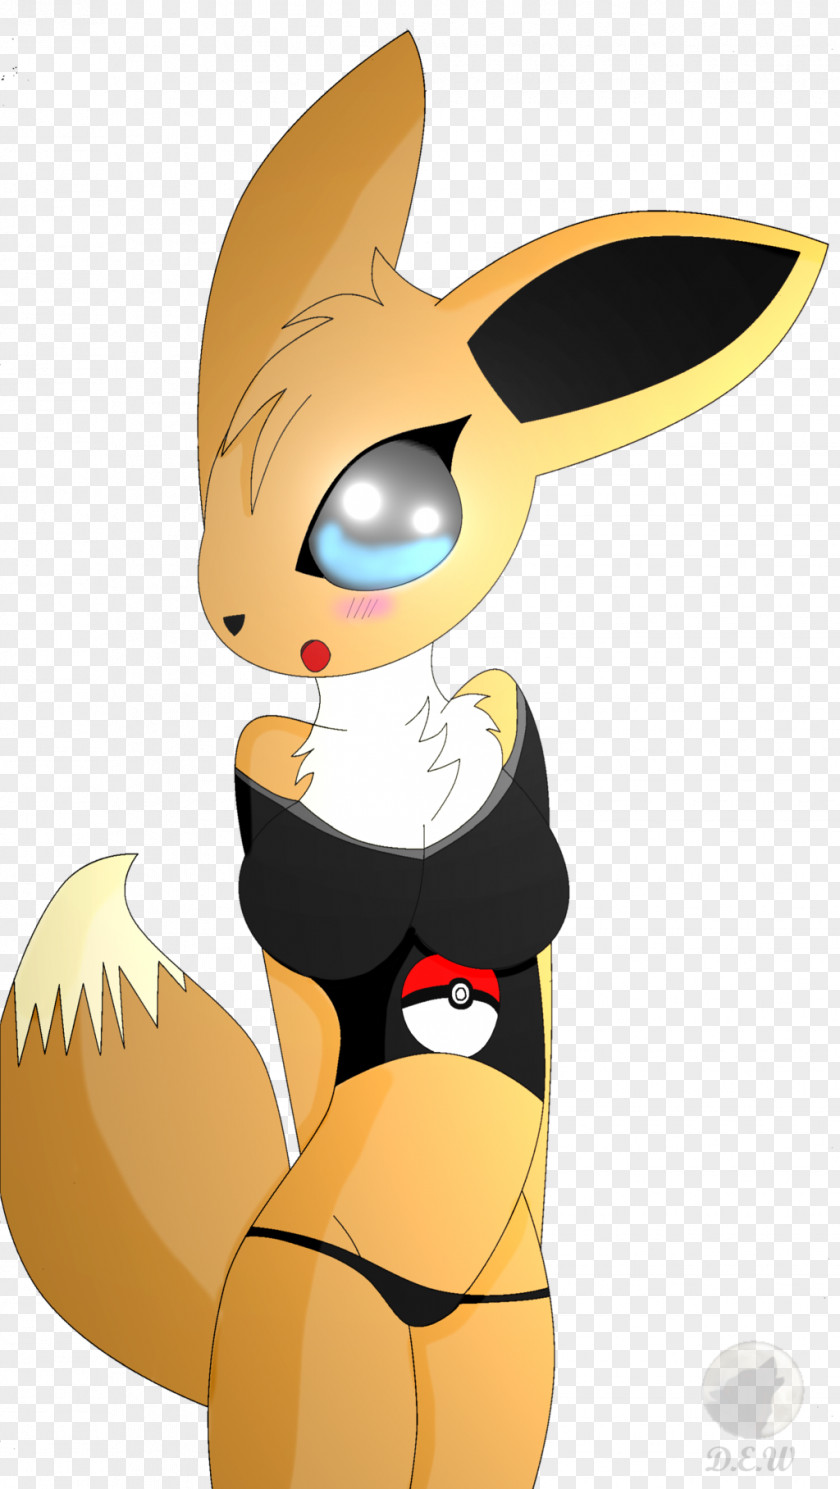 Rabbit Pokémon Red And Blue Eevee Glaceon PNG